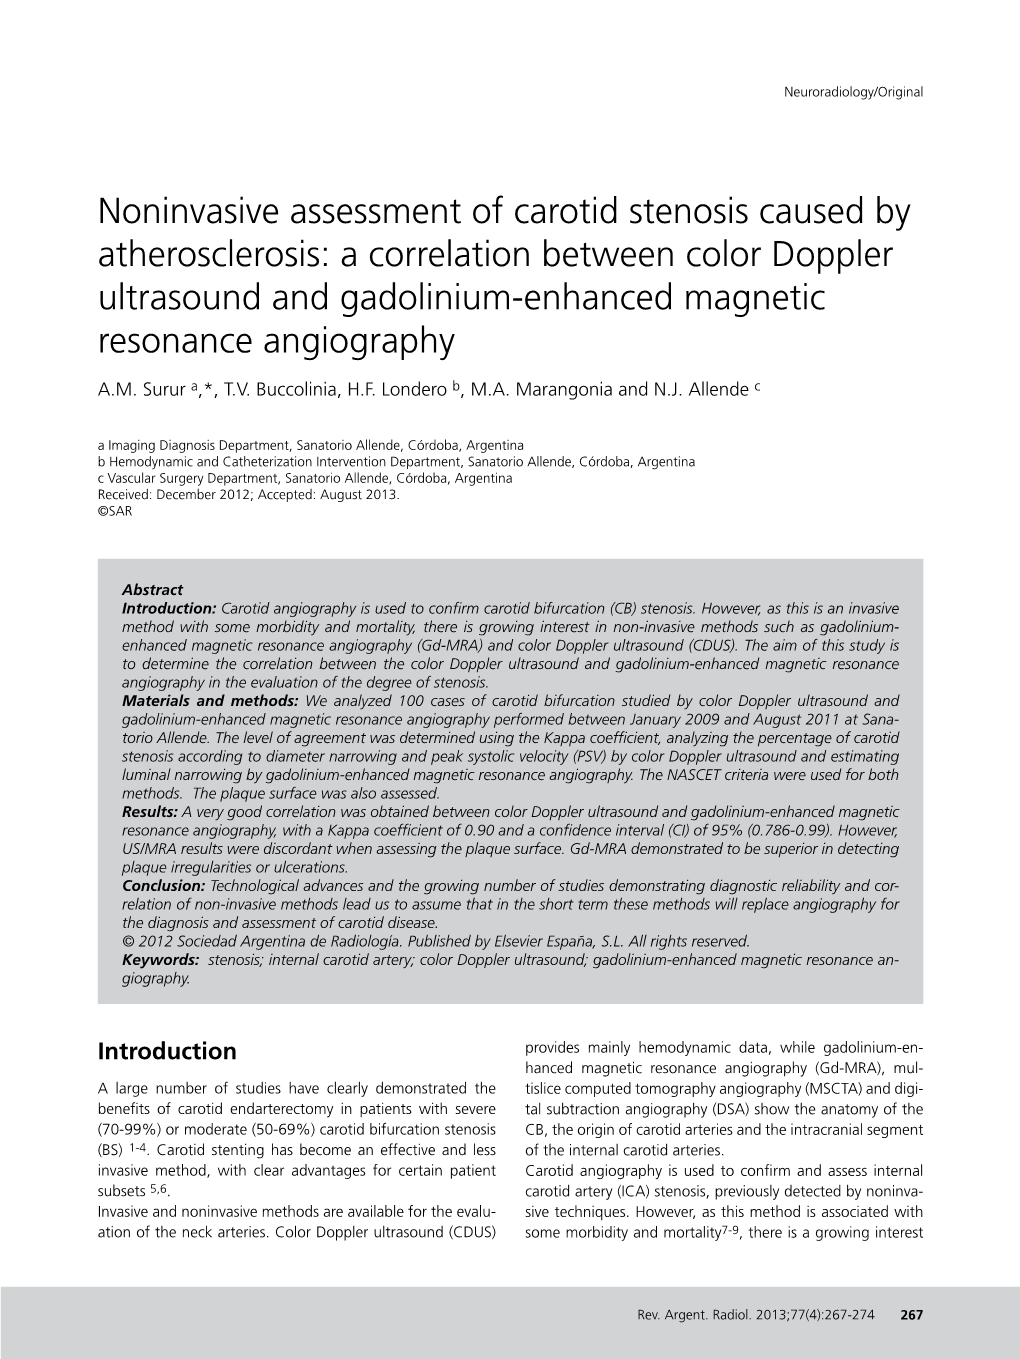 Noninvasive Assessment of Carotid Stenosis Caused by Atherosclerosis